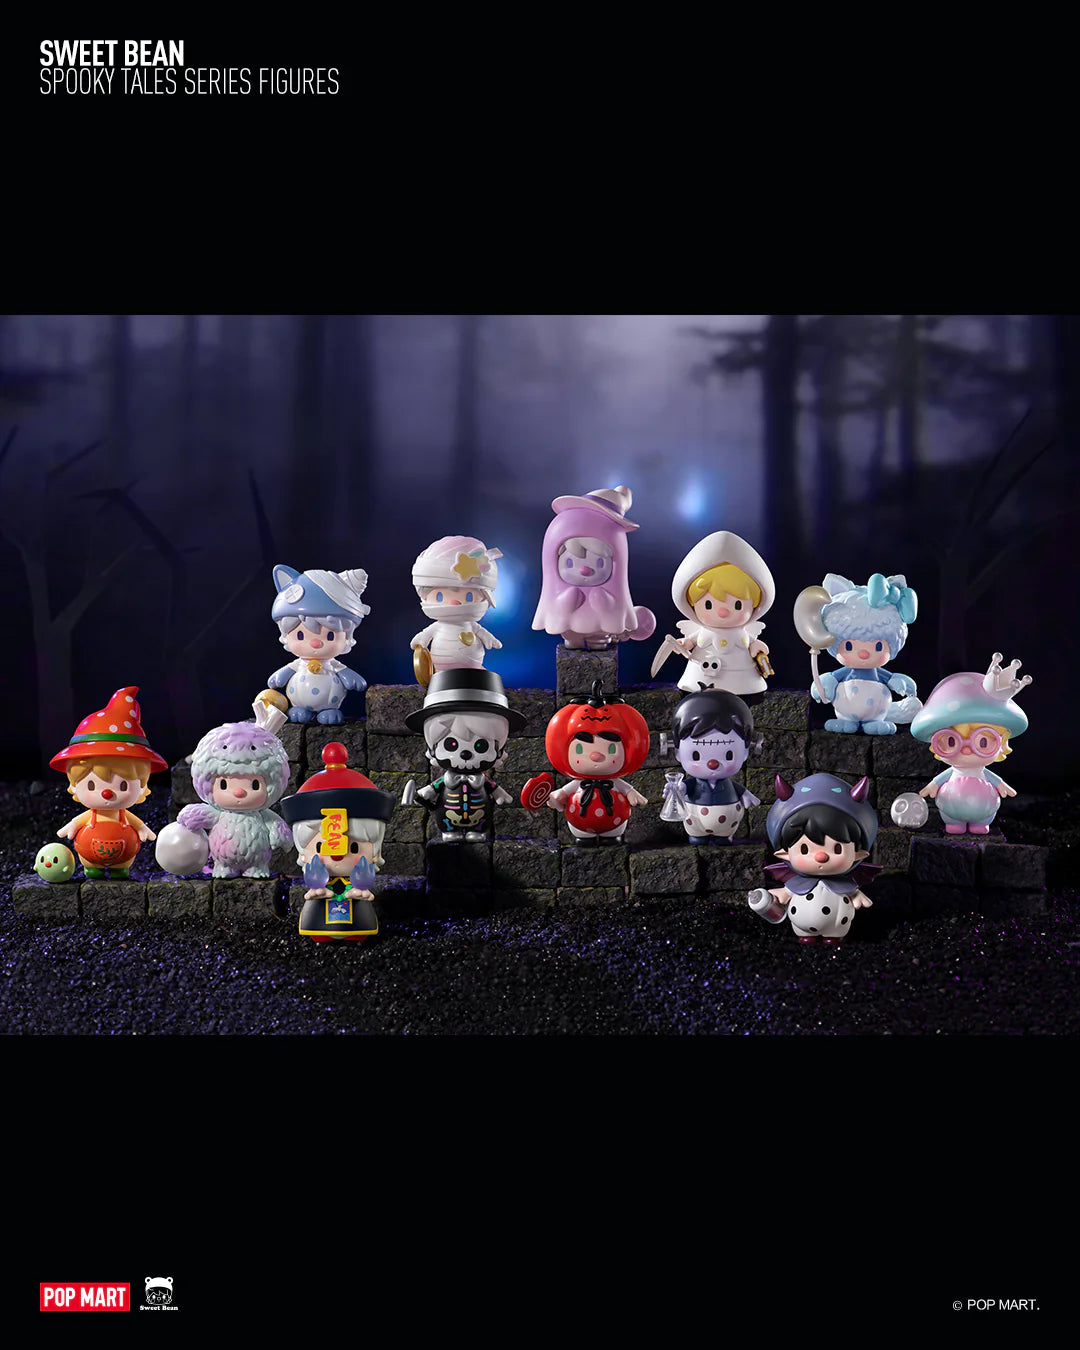 SWEET BEAN SPOOKY TALES Blind Box Series figurines: ghost, clown, doll, girl with hat and glasses, girl with mushroom hat, and more.